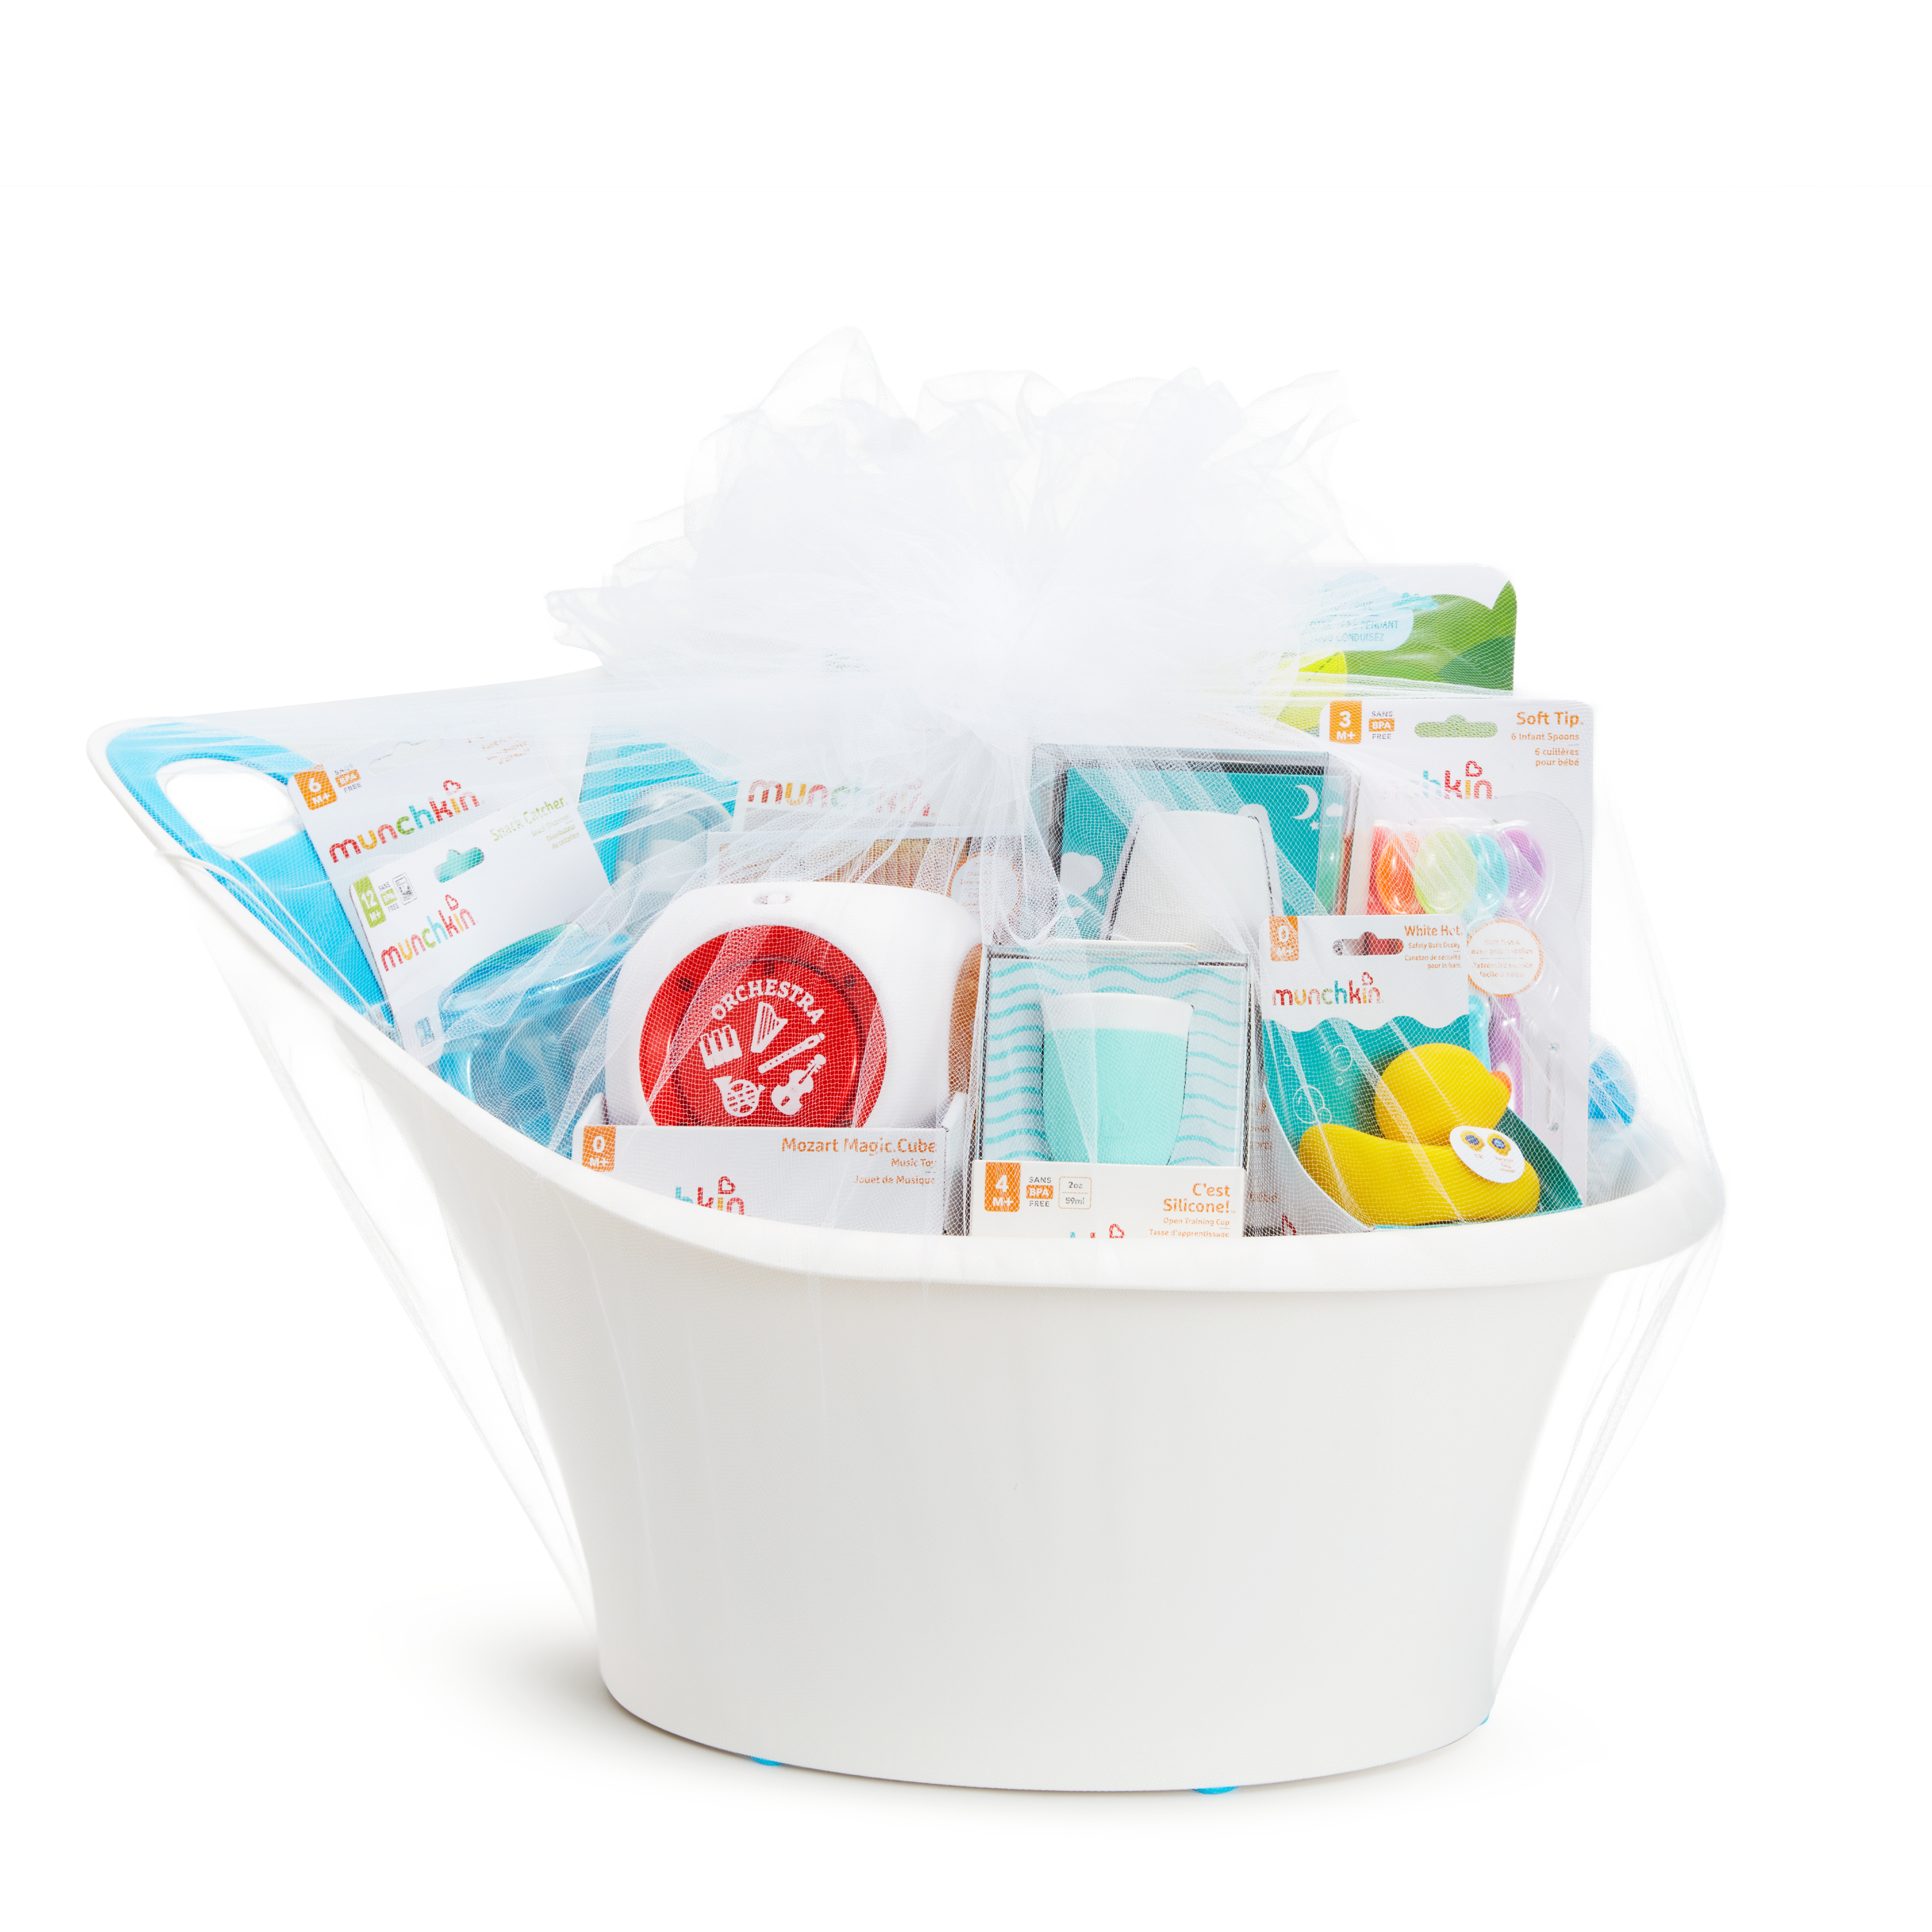 Munchkin® My Munchkin Gift Basket, Great for Baby Showers, Includes 15 Baby Products, Blue, Unisex - image 2 of 29